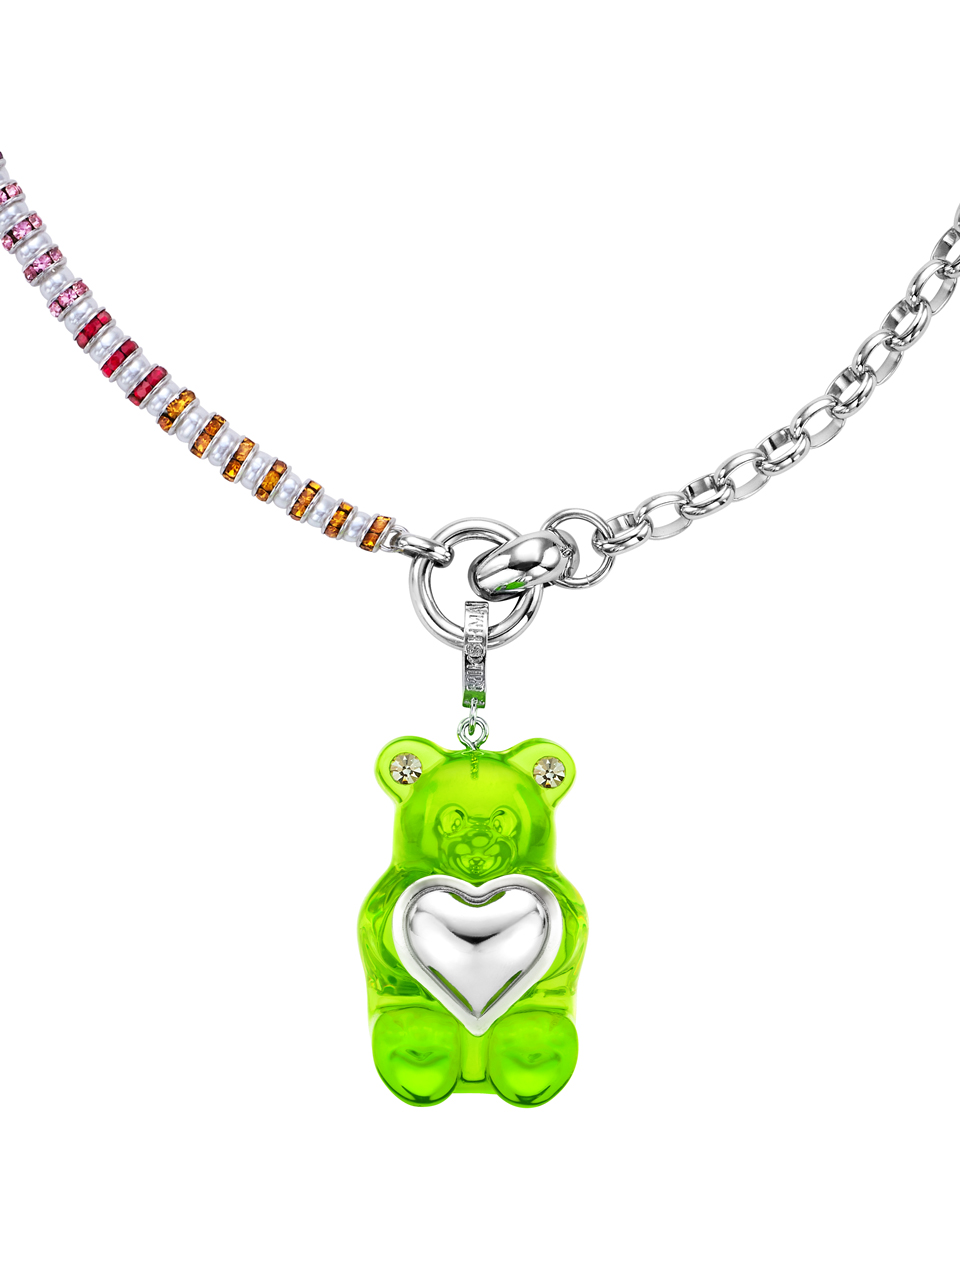 ICONIC BEAR CHAIN NECKLACE